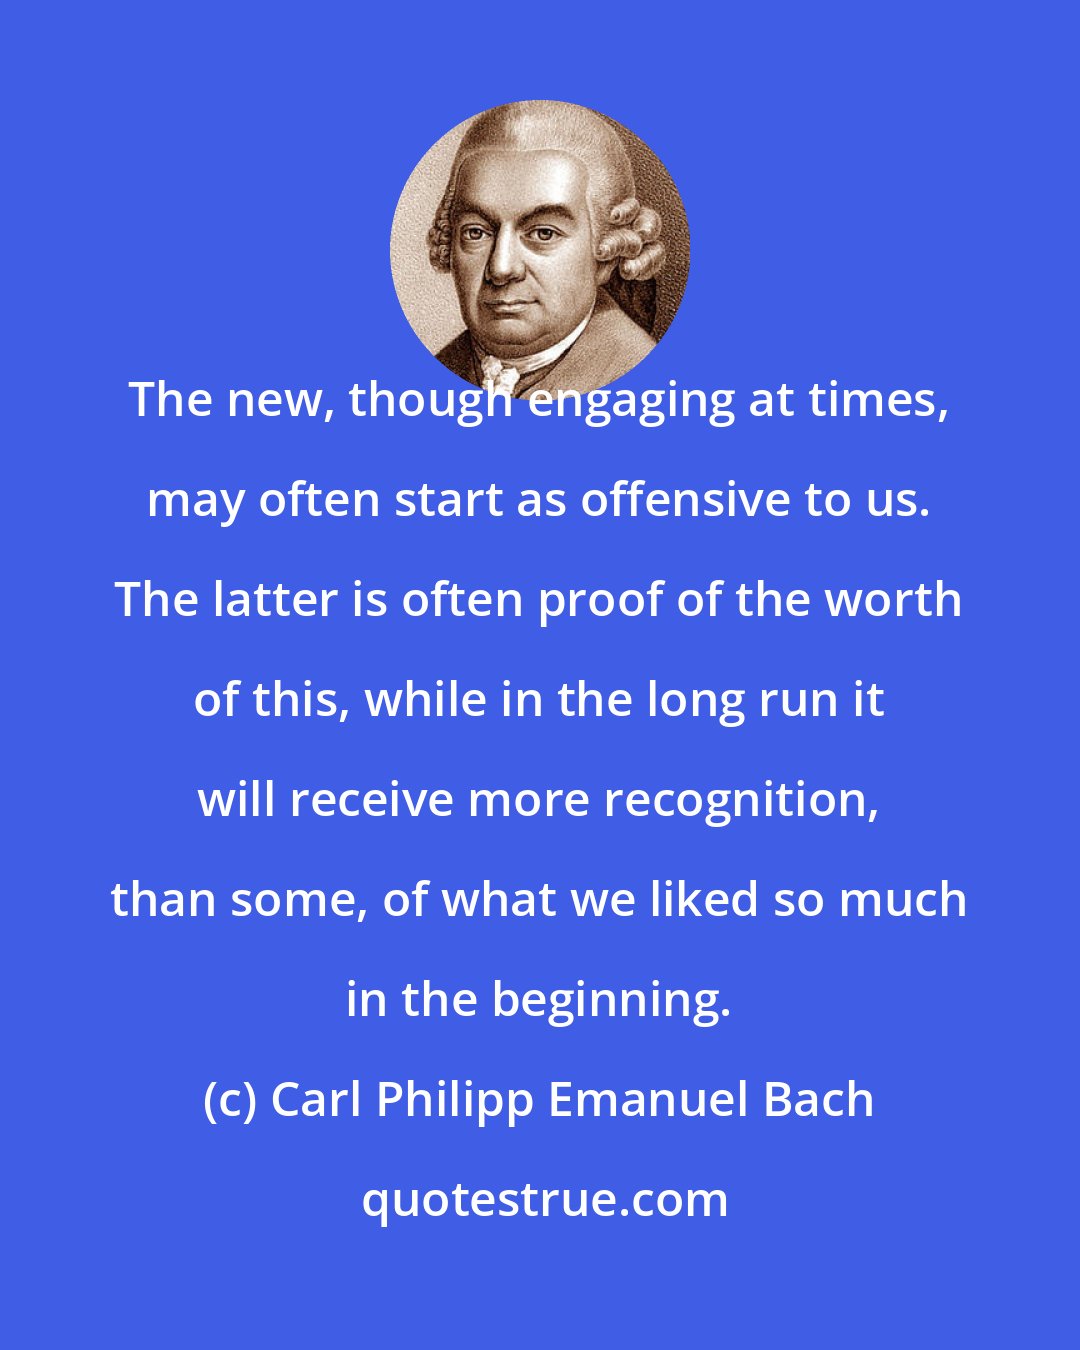 Carl Philipp Emanuel Bach: The new, though engaging at times, may often start as offensive to us. The latter is often proof of the worth of this, while in the long run it will receive more recognition, than some, of what we liked so much in the beginning.